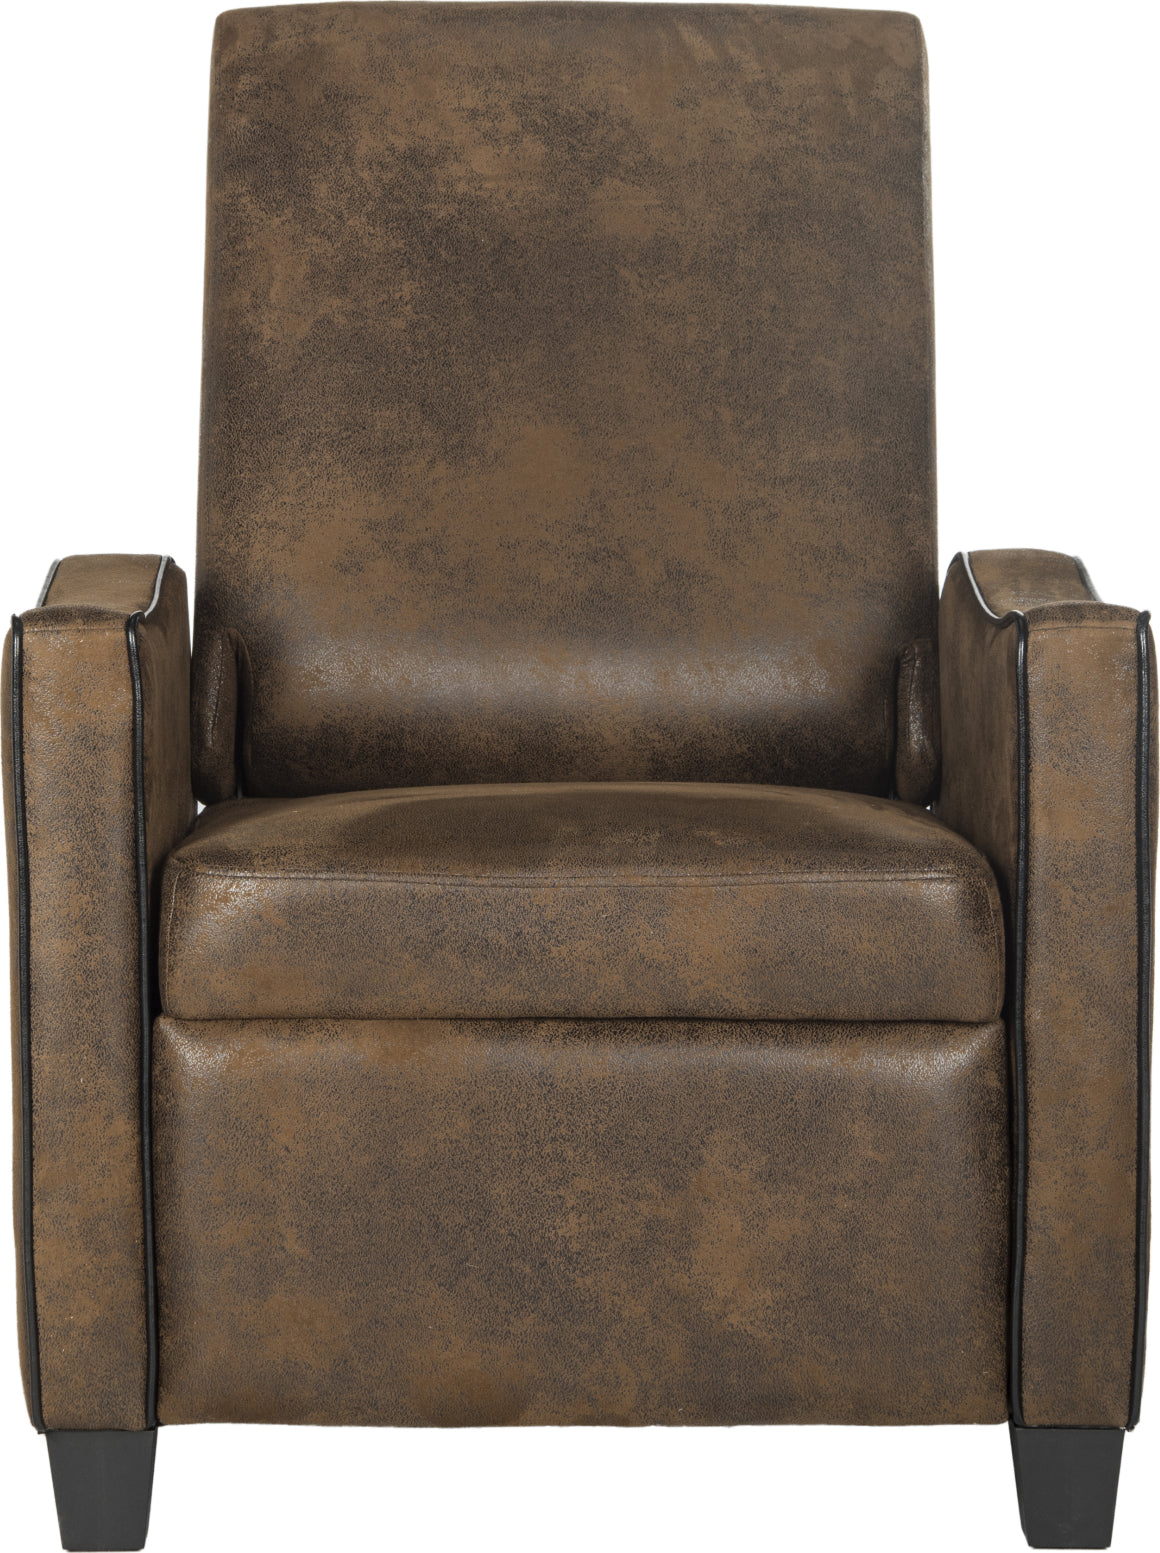 Safavieh Holden Vintage Recliner Chair Brown and Black Furniture main image